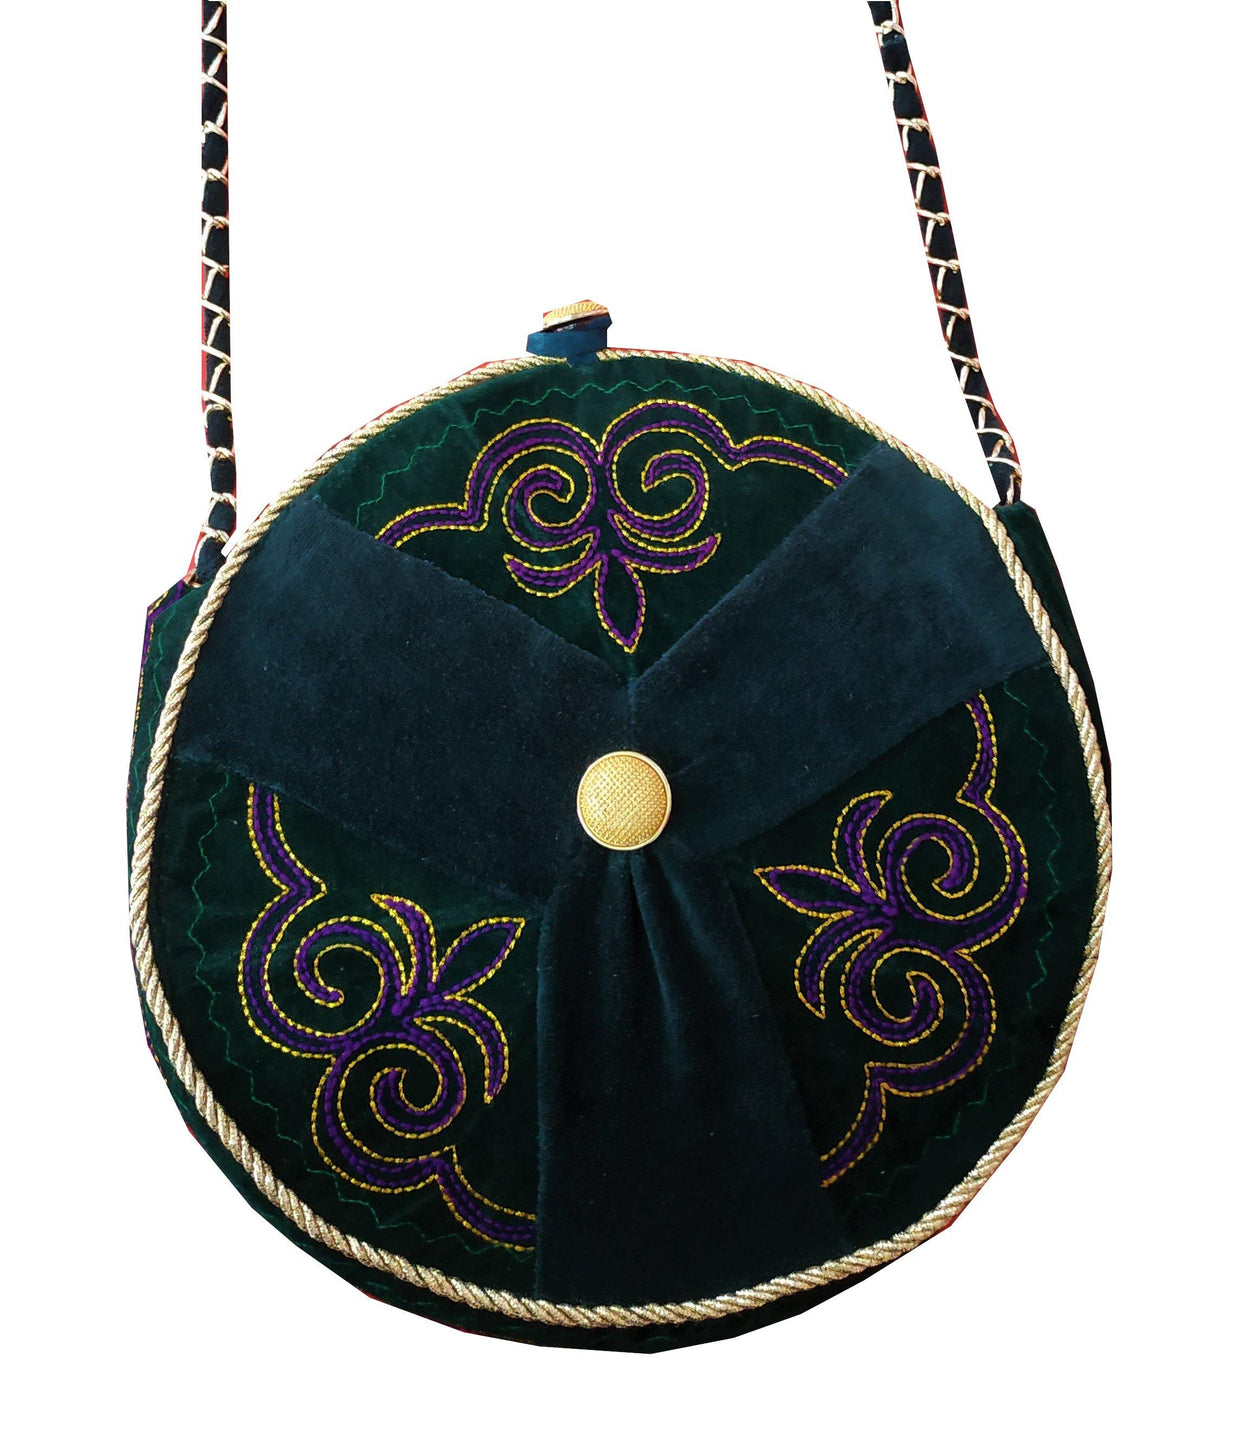 Exclusive dark green round ethno style bag with a long handle - GLEZANT designer goods store. 